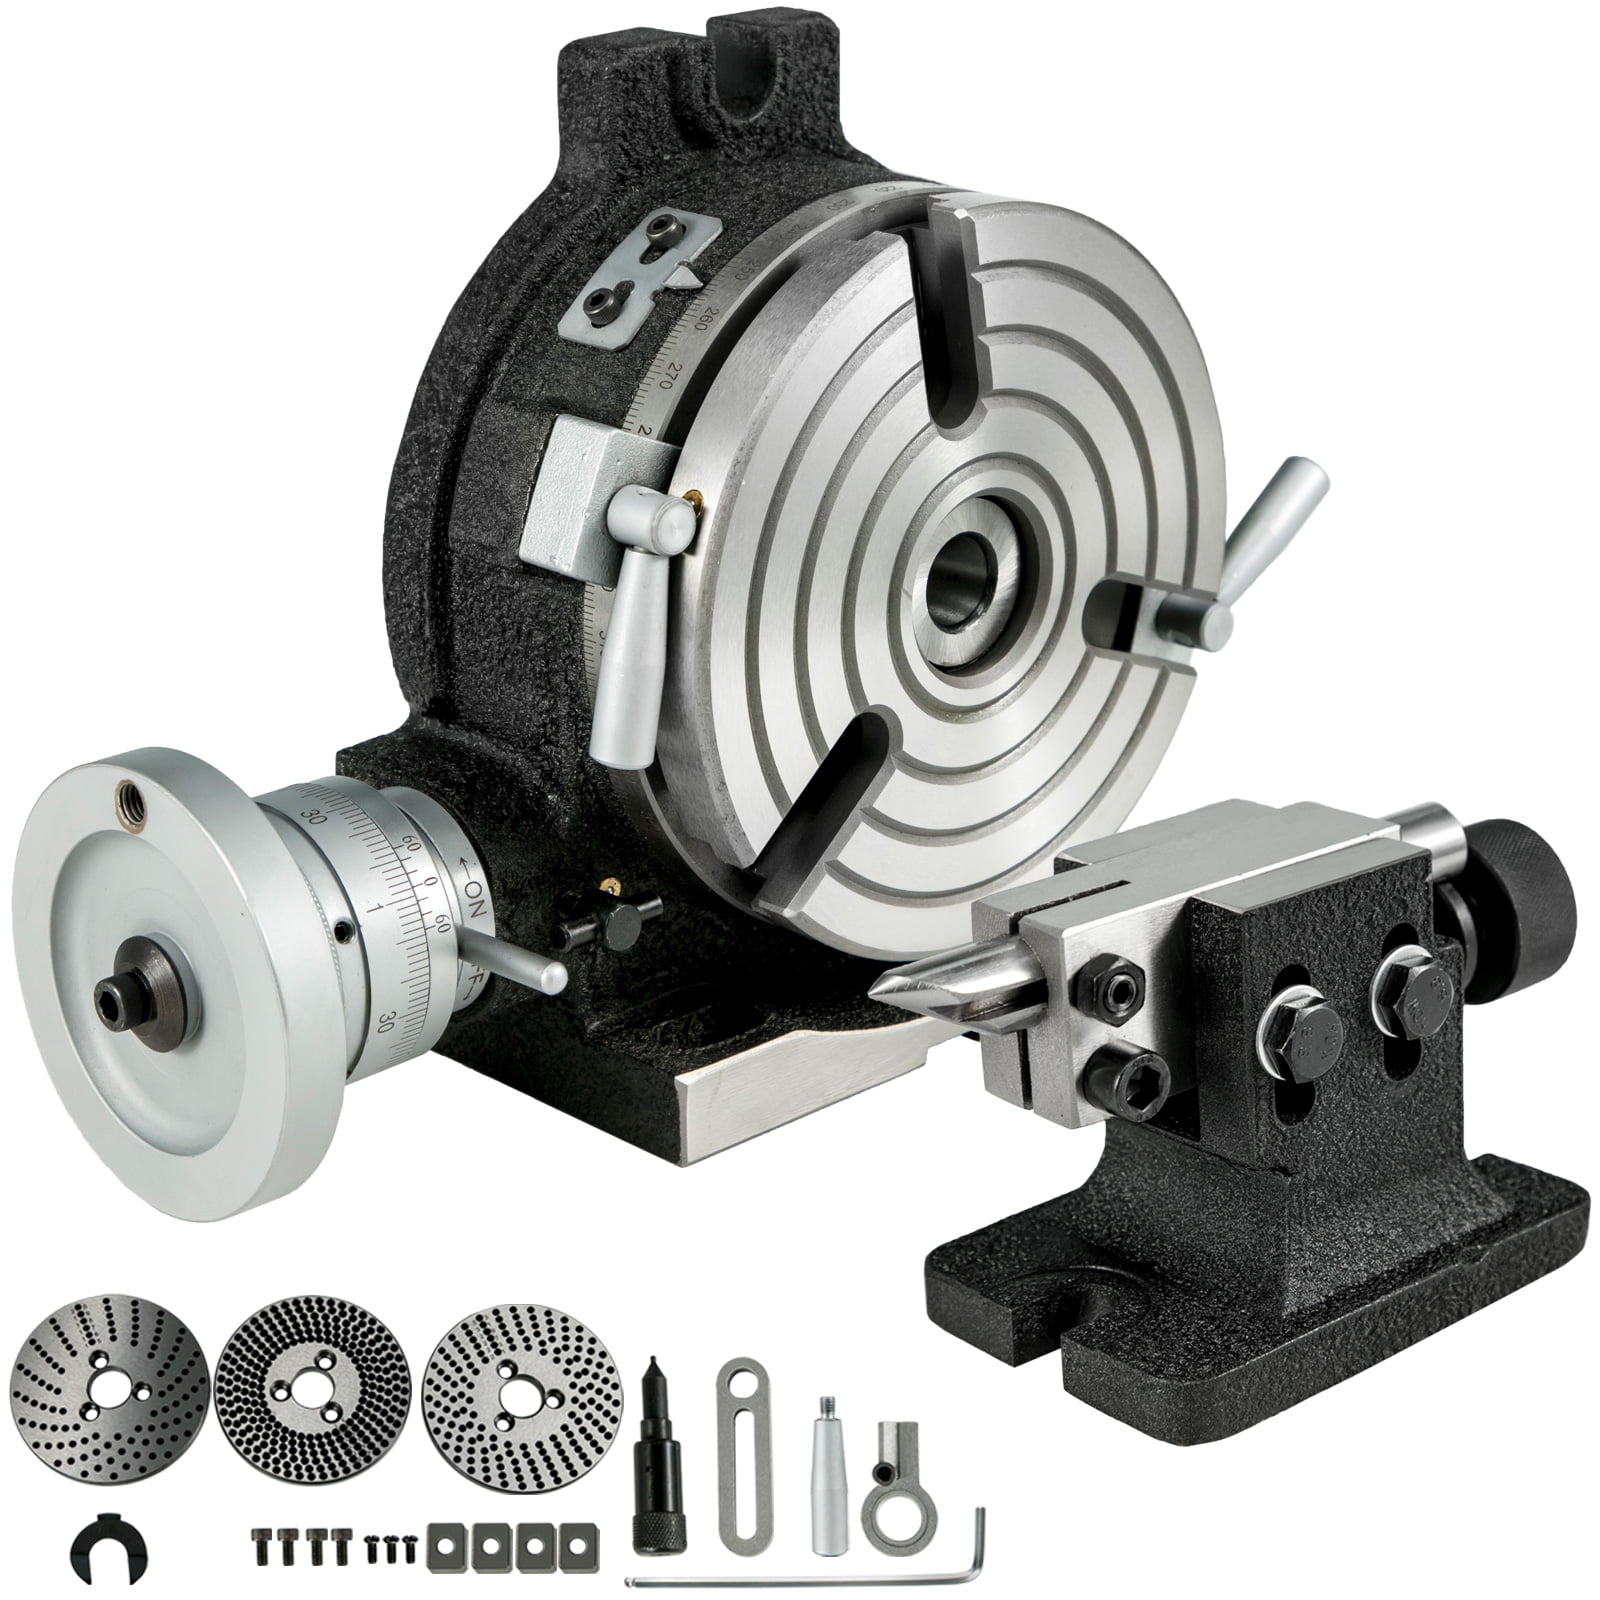 WITH 70 MM 4 JAW INDEPENDENT CHUCK MILLING INDEXING 4/100 ROTARY TABLE QUALITY PRECISION HORIZONTAL VERTICAL WITH SUITABLE M6 CLAMP KIT & SMALL CHUCK 